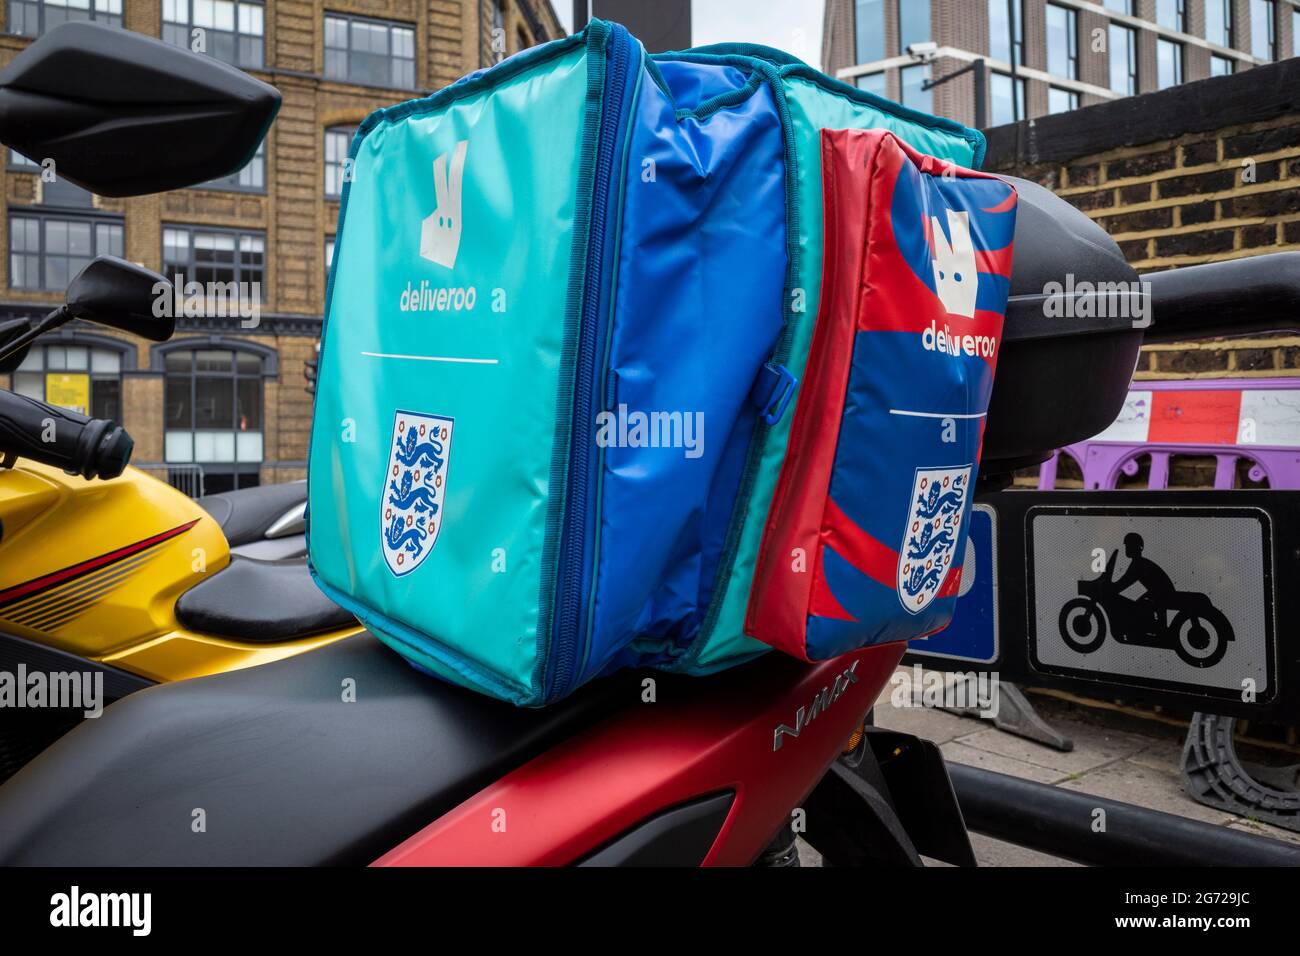 London, UK.  10 July 2021.  A Deliveroo delivery carrier on a motorcycle is decorated with the Three Lions in support of the England national football team. Italy play England tomorrow night in the final of Euro 2020 at Wembley Stadium.  It is the first major final that England will have played in since winning the World Cup in 1966 but Italy remain unbeaten in their last 33 matches.  Credit: Stephen Chung / Alamy Live News Stock Photo